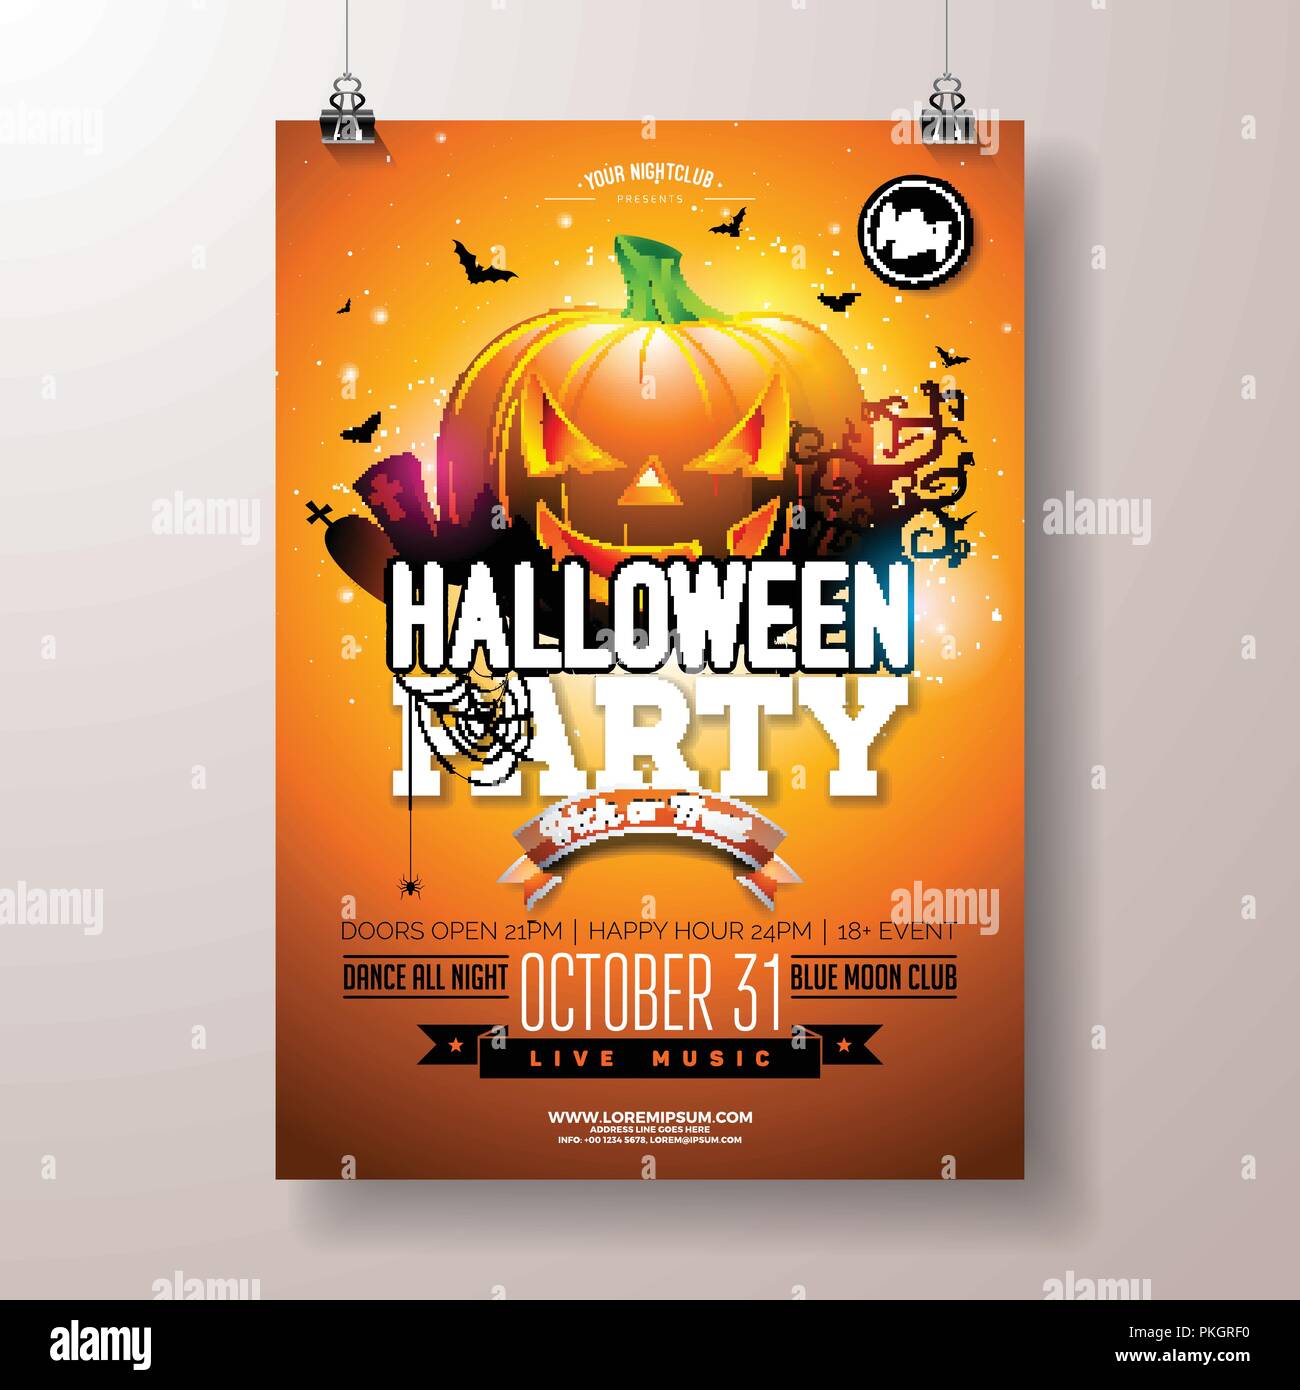 Halloween Party flyer vector illustration with scary faced pumpkin on ...